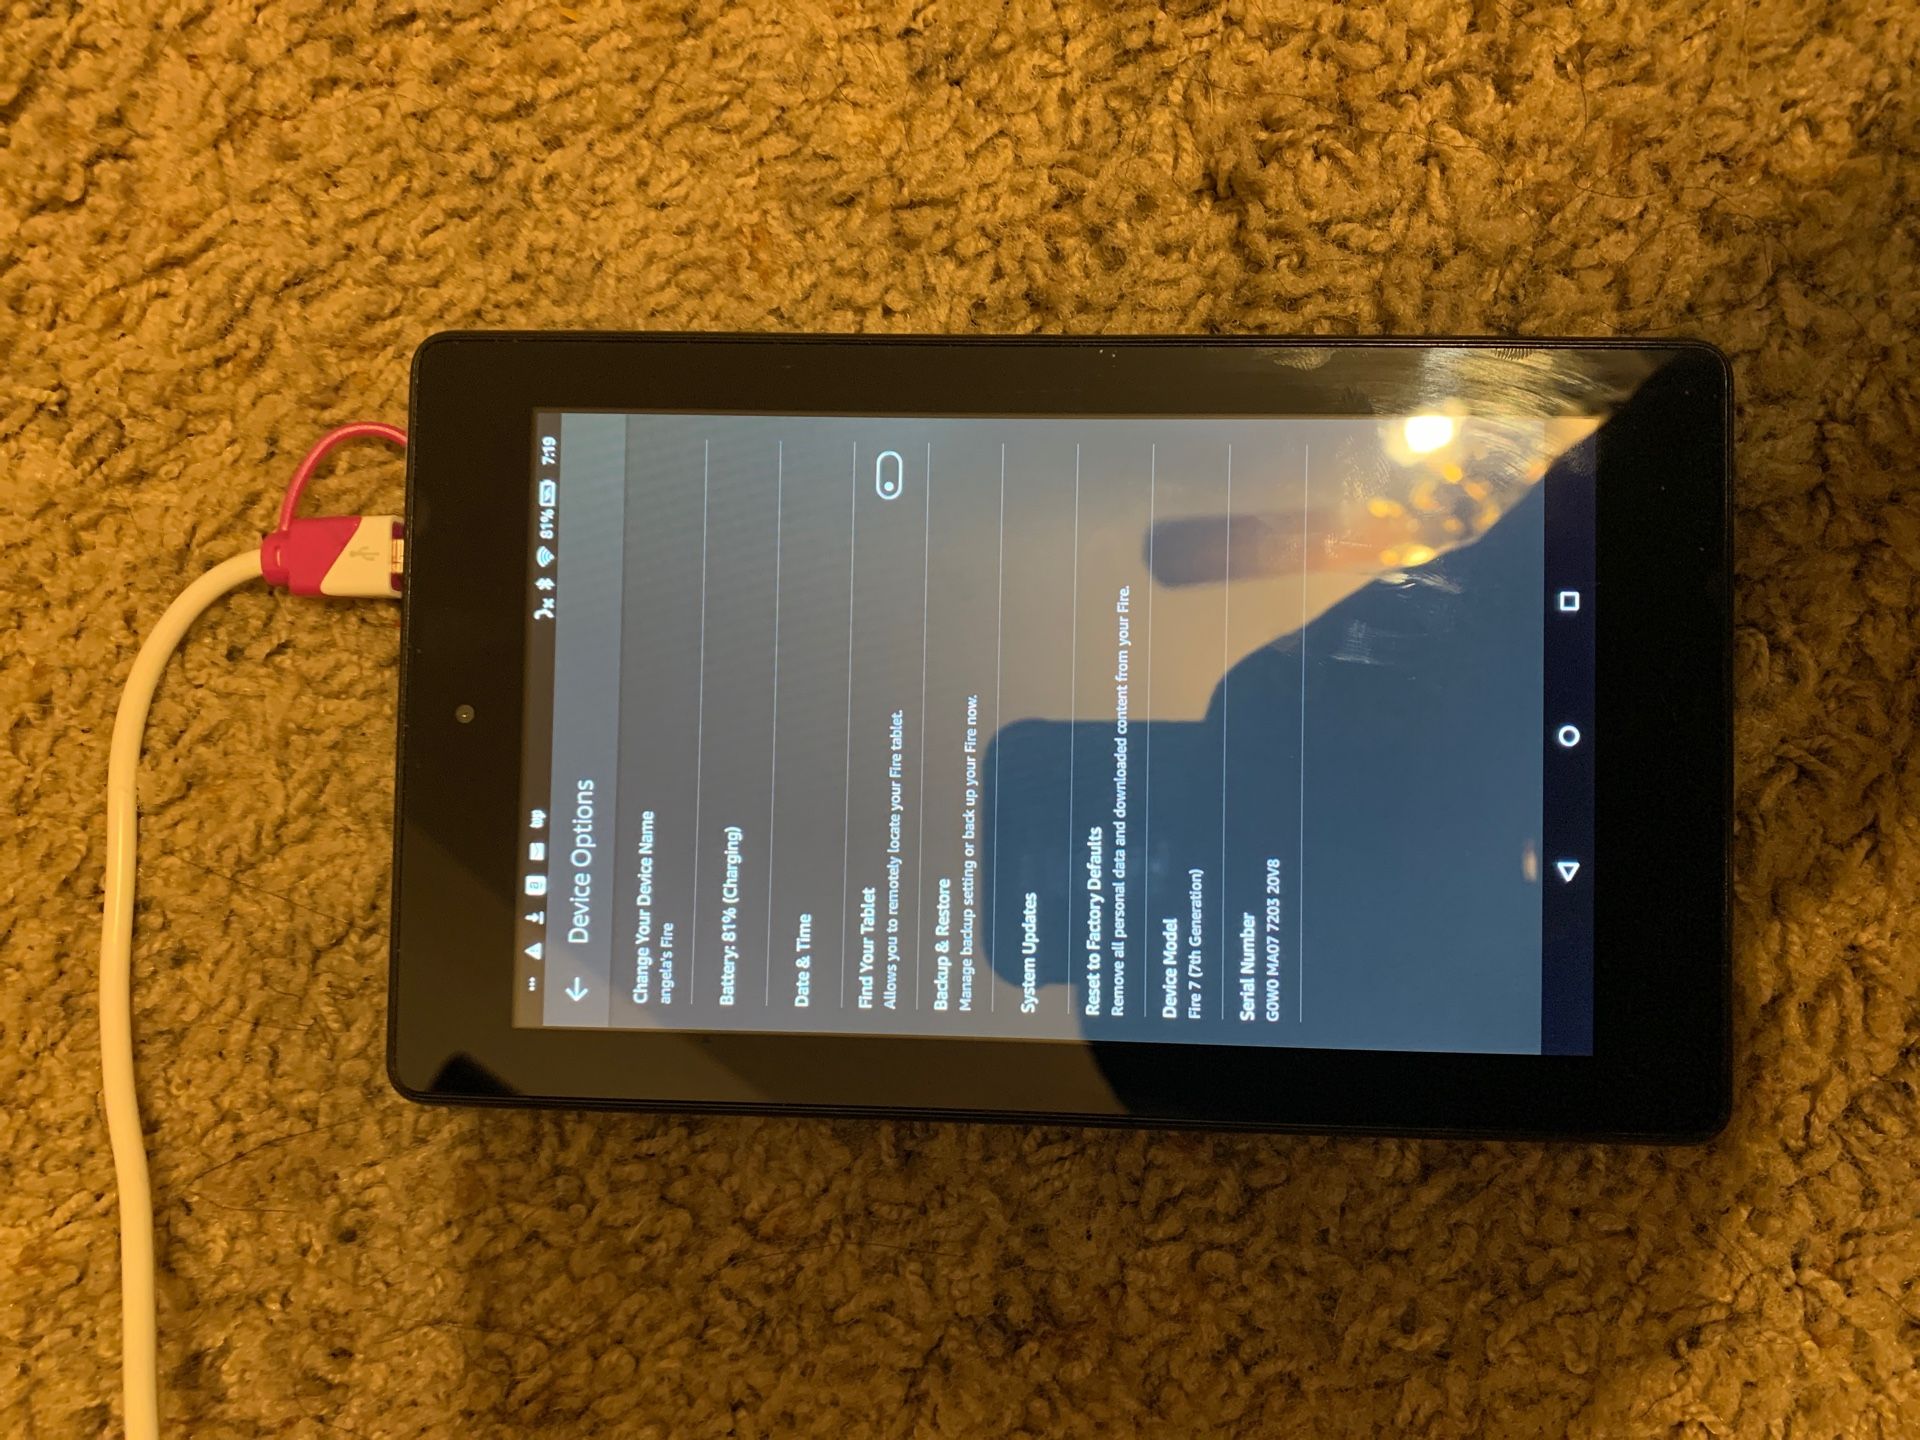 Amazon Fire 7 Tablet (7th generation)